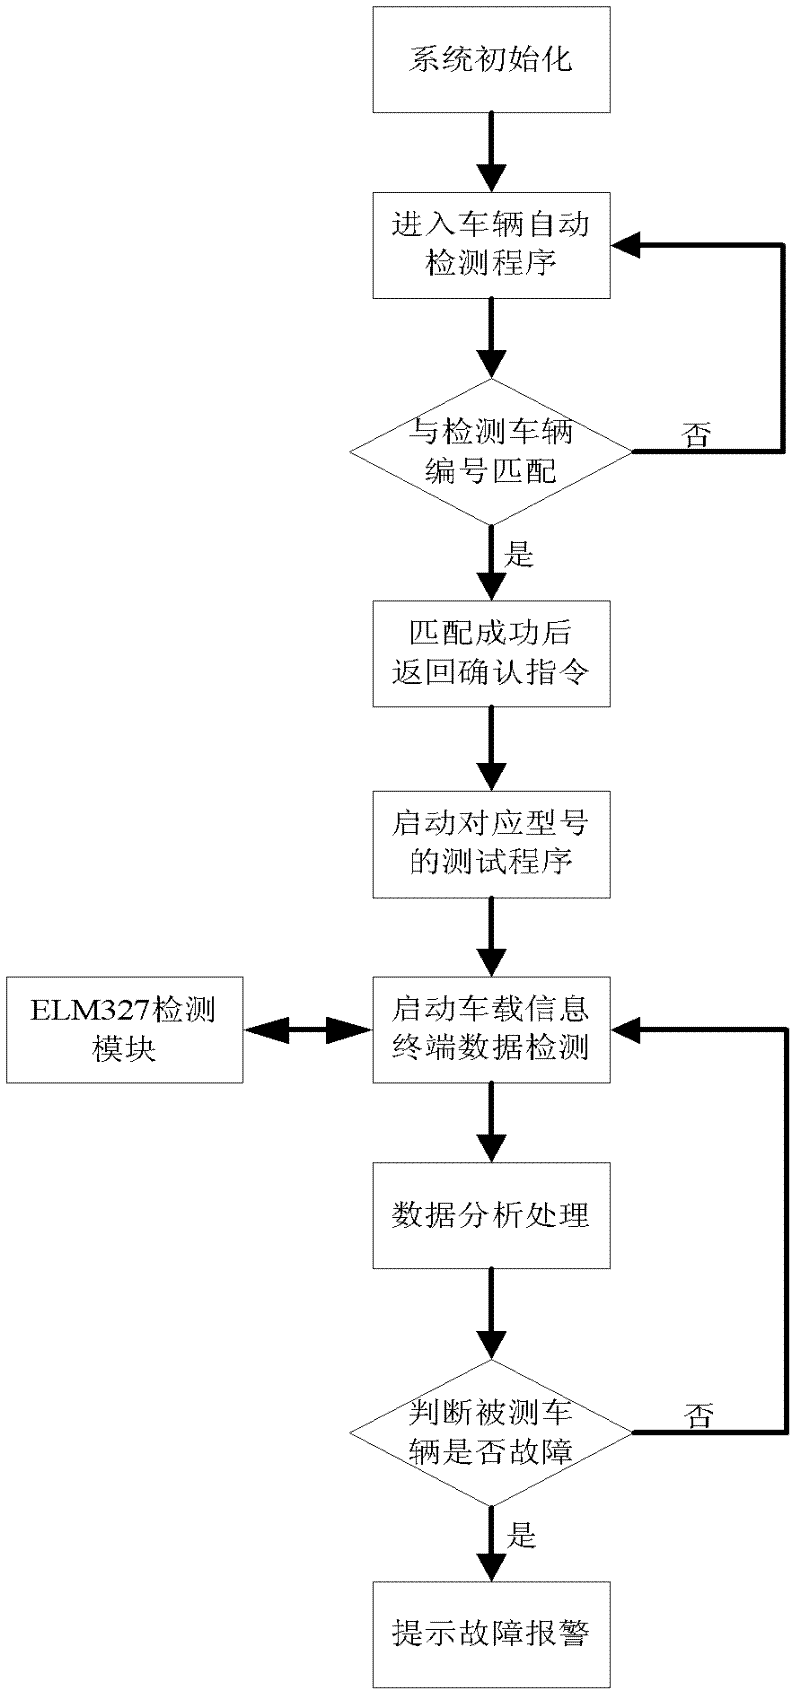 Vehicle failure remote diagnostic method based on in-vehicle information terminal